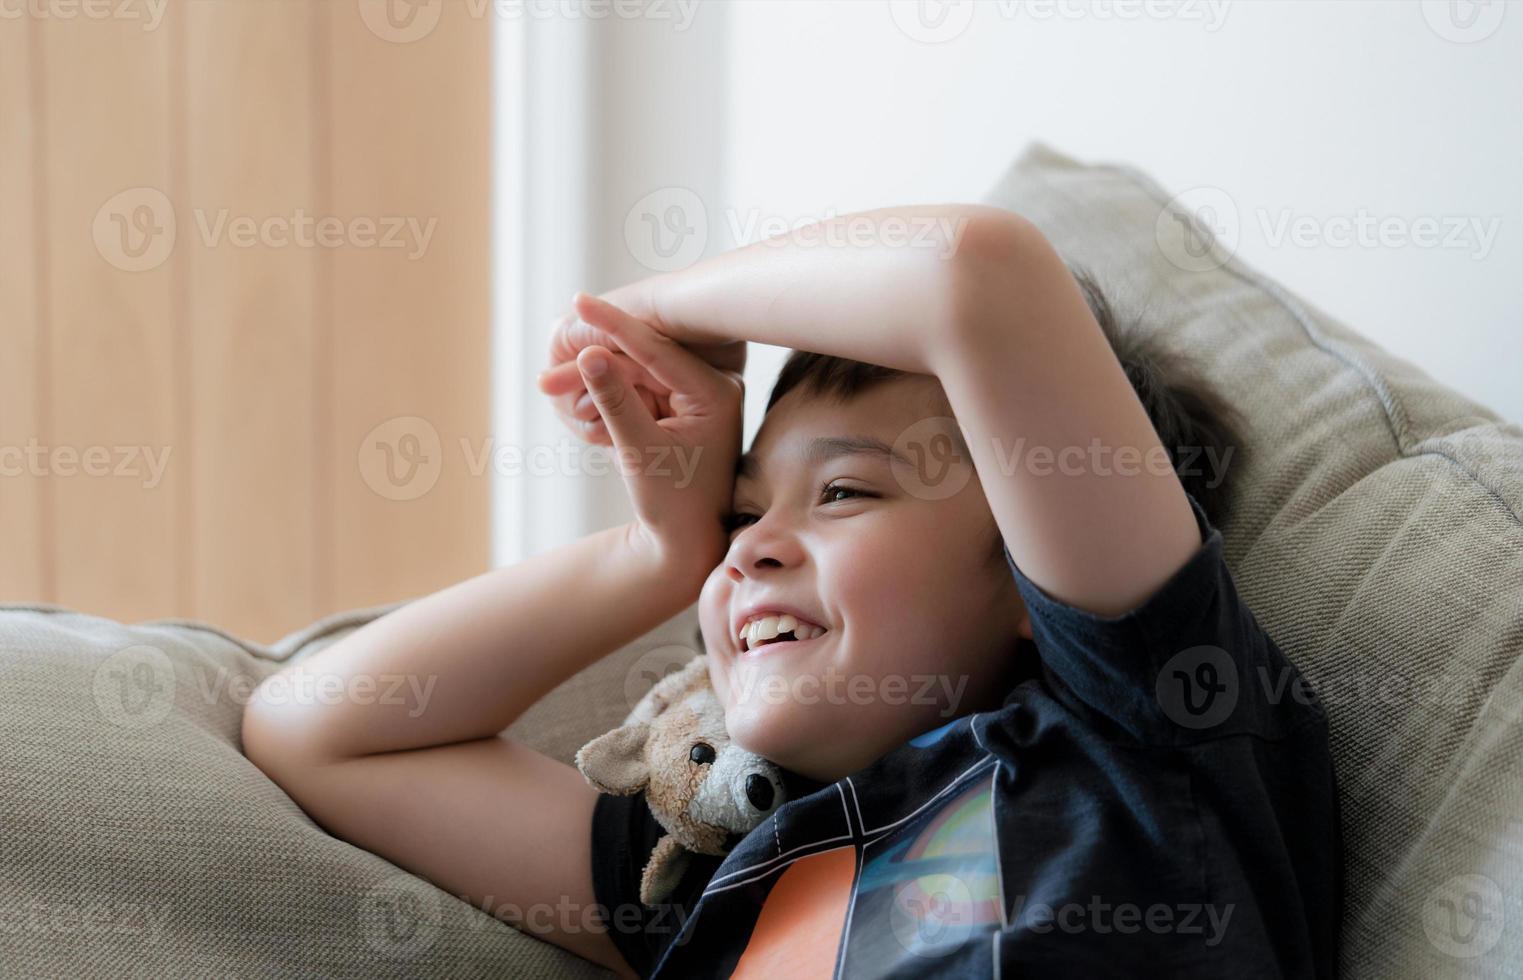 Portrait happy kid laughing, Cute little boy with big smile sitting on soafa having fun watching cartoon on TV, Positive child with smiling face relaxing enjoy happy time alone on weekend. photo